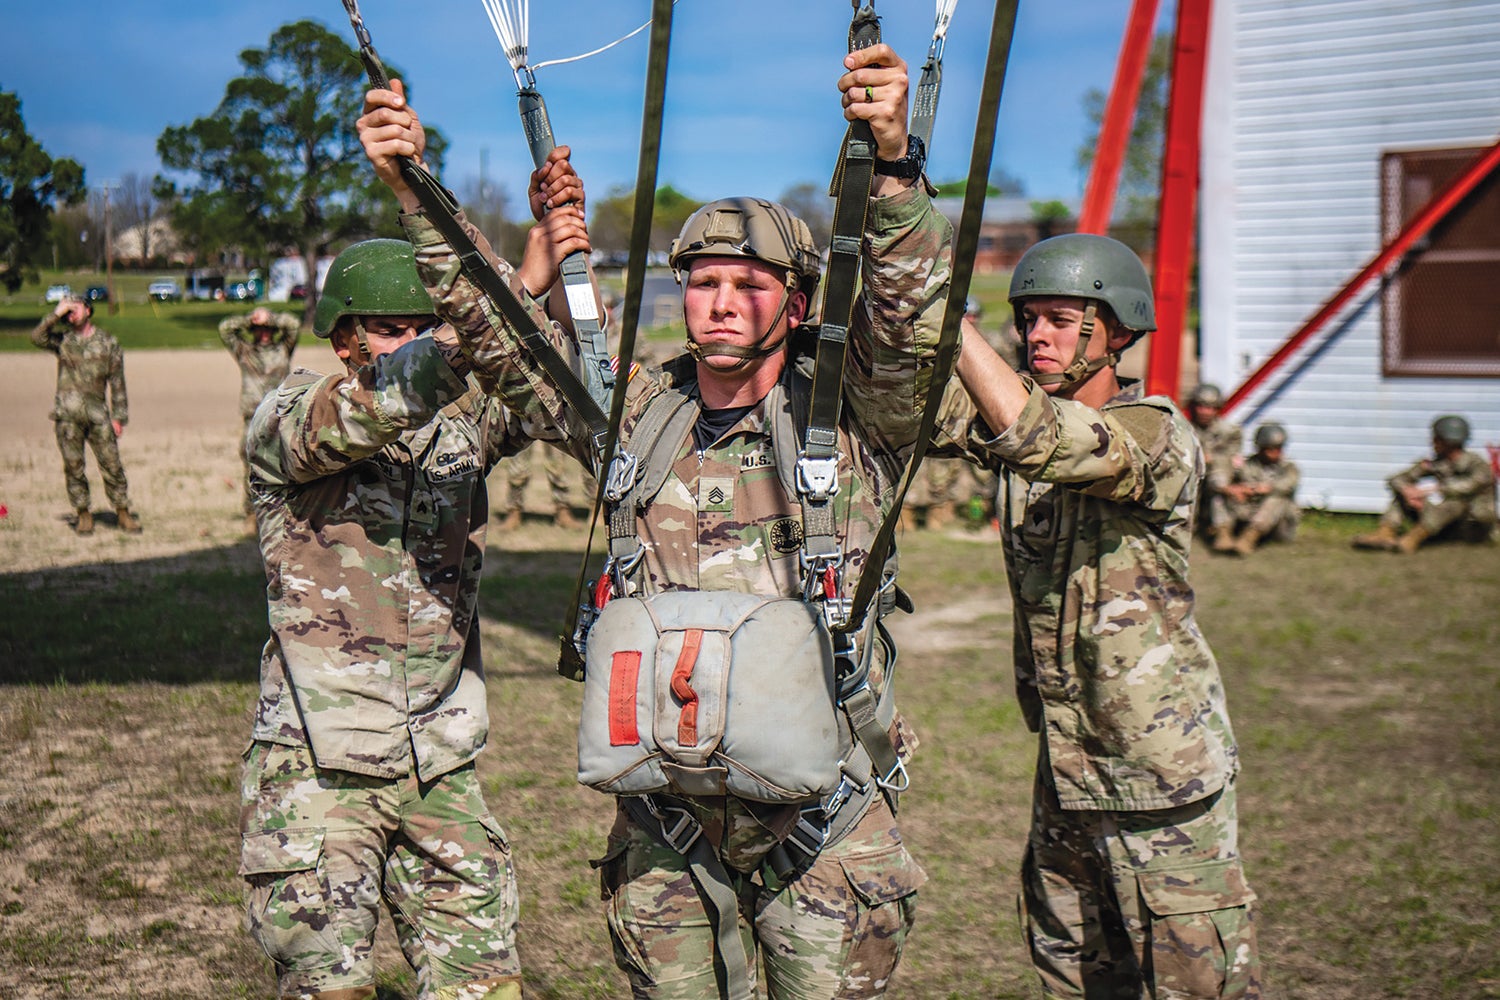 Soldiers from the 1st Battalion, 507th Parachute Infantry Regiment, practice before tower training at the U.S. Army Airborne School, Fort Moore, Georgia. (Credit: U.S. Army)